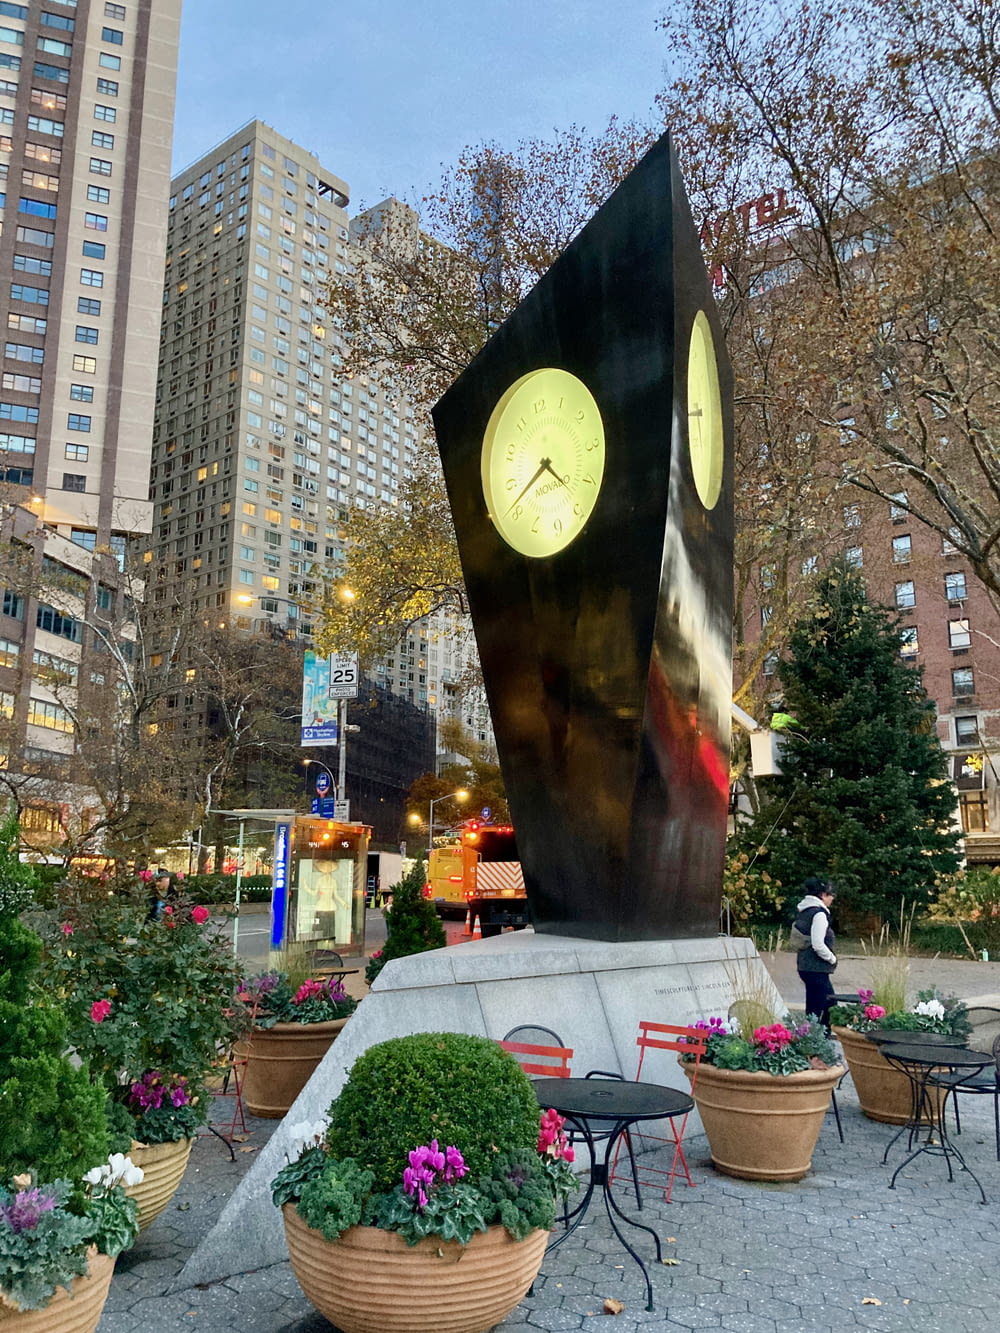 a sculpture of a clock in the middle of a park